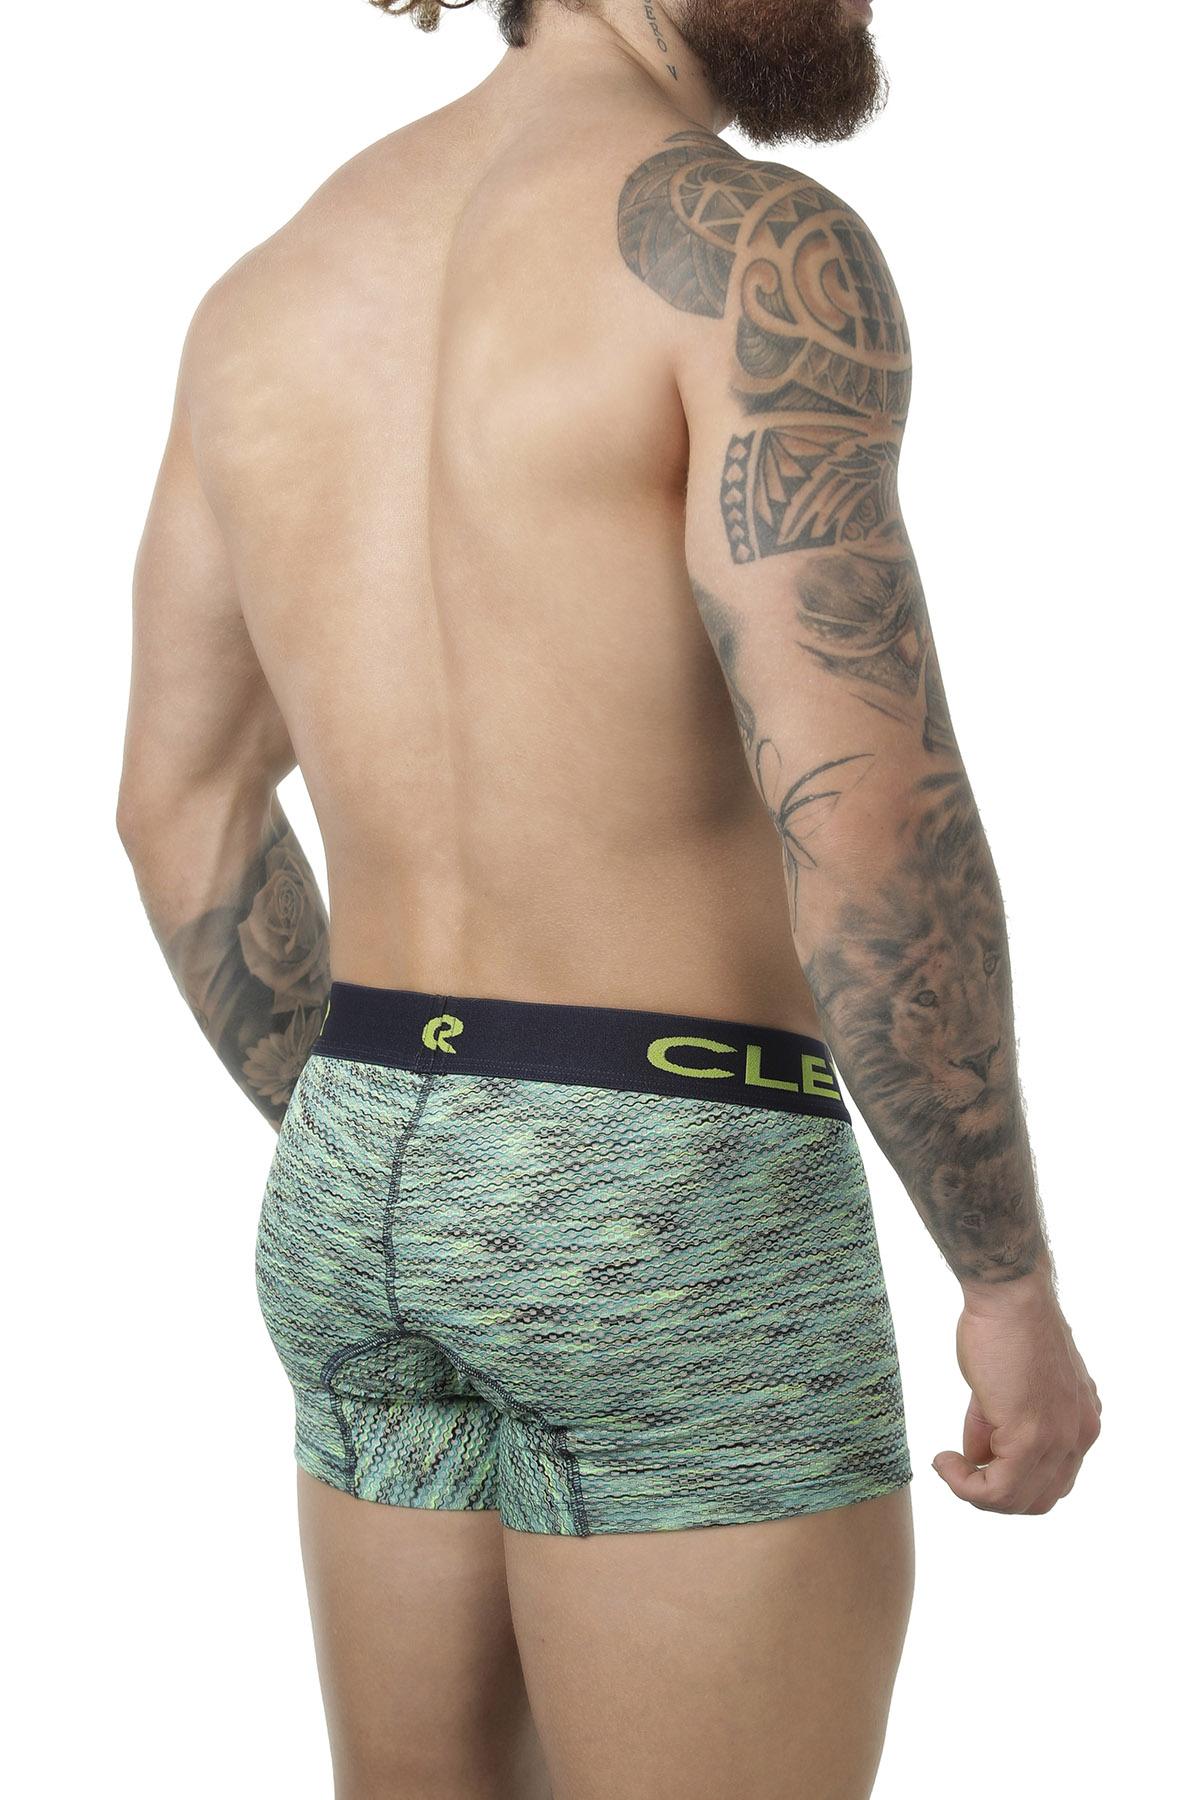 Clever Limited Edition Green/Black Trunk 219992